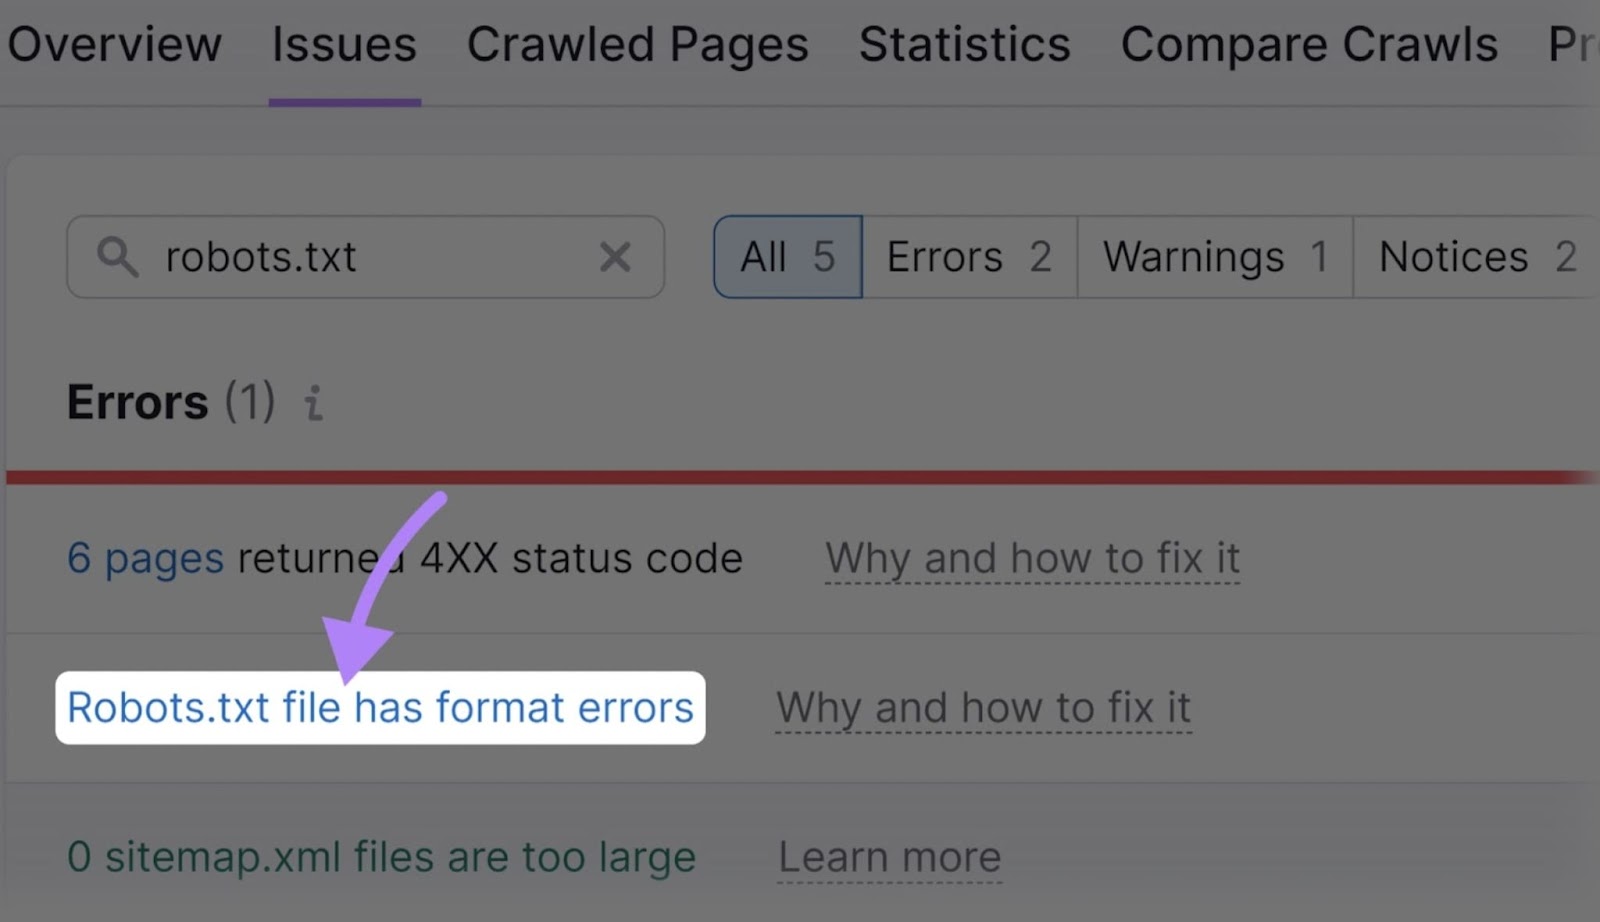 "Robots.txt file has format errors" issue in Site Audit tool